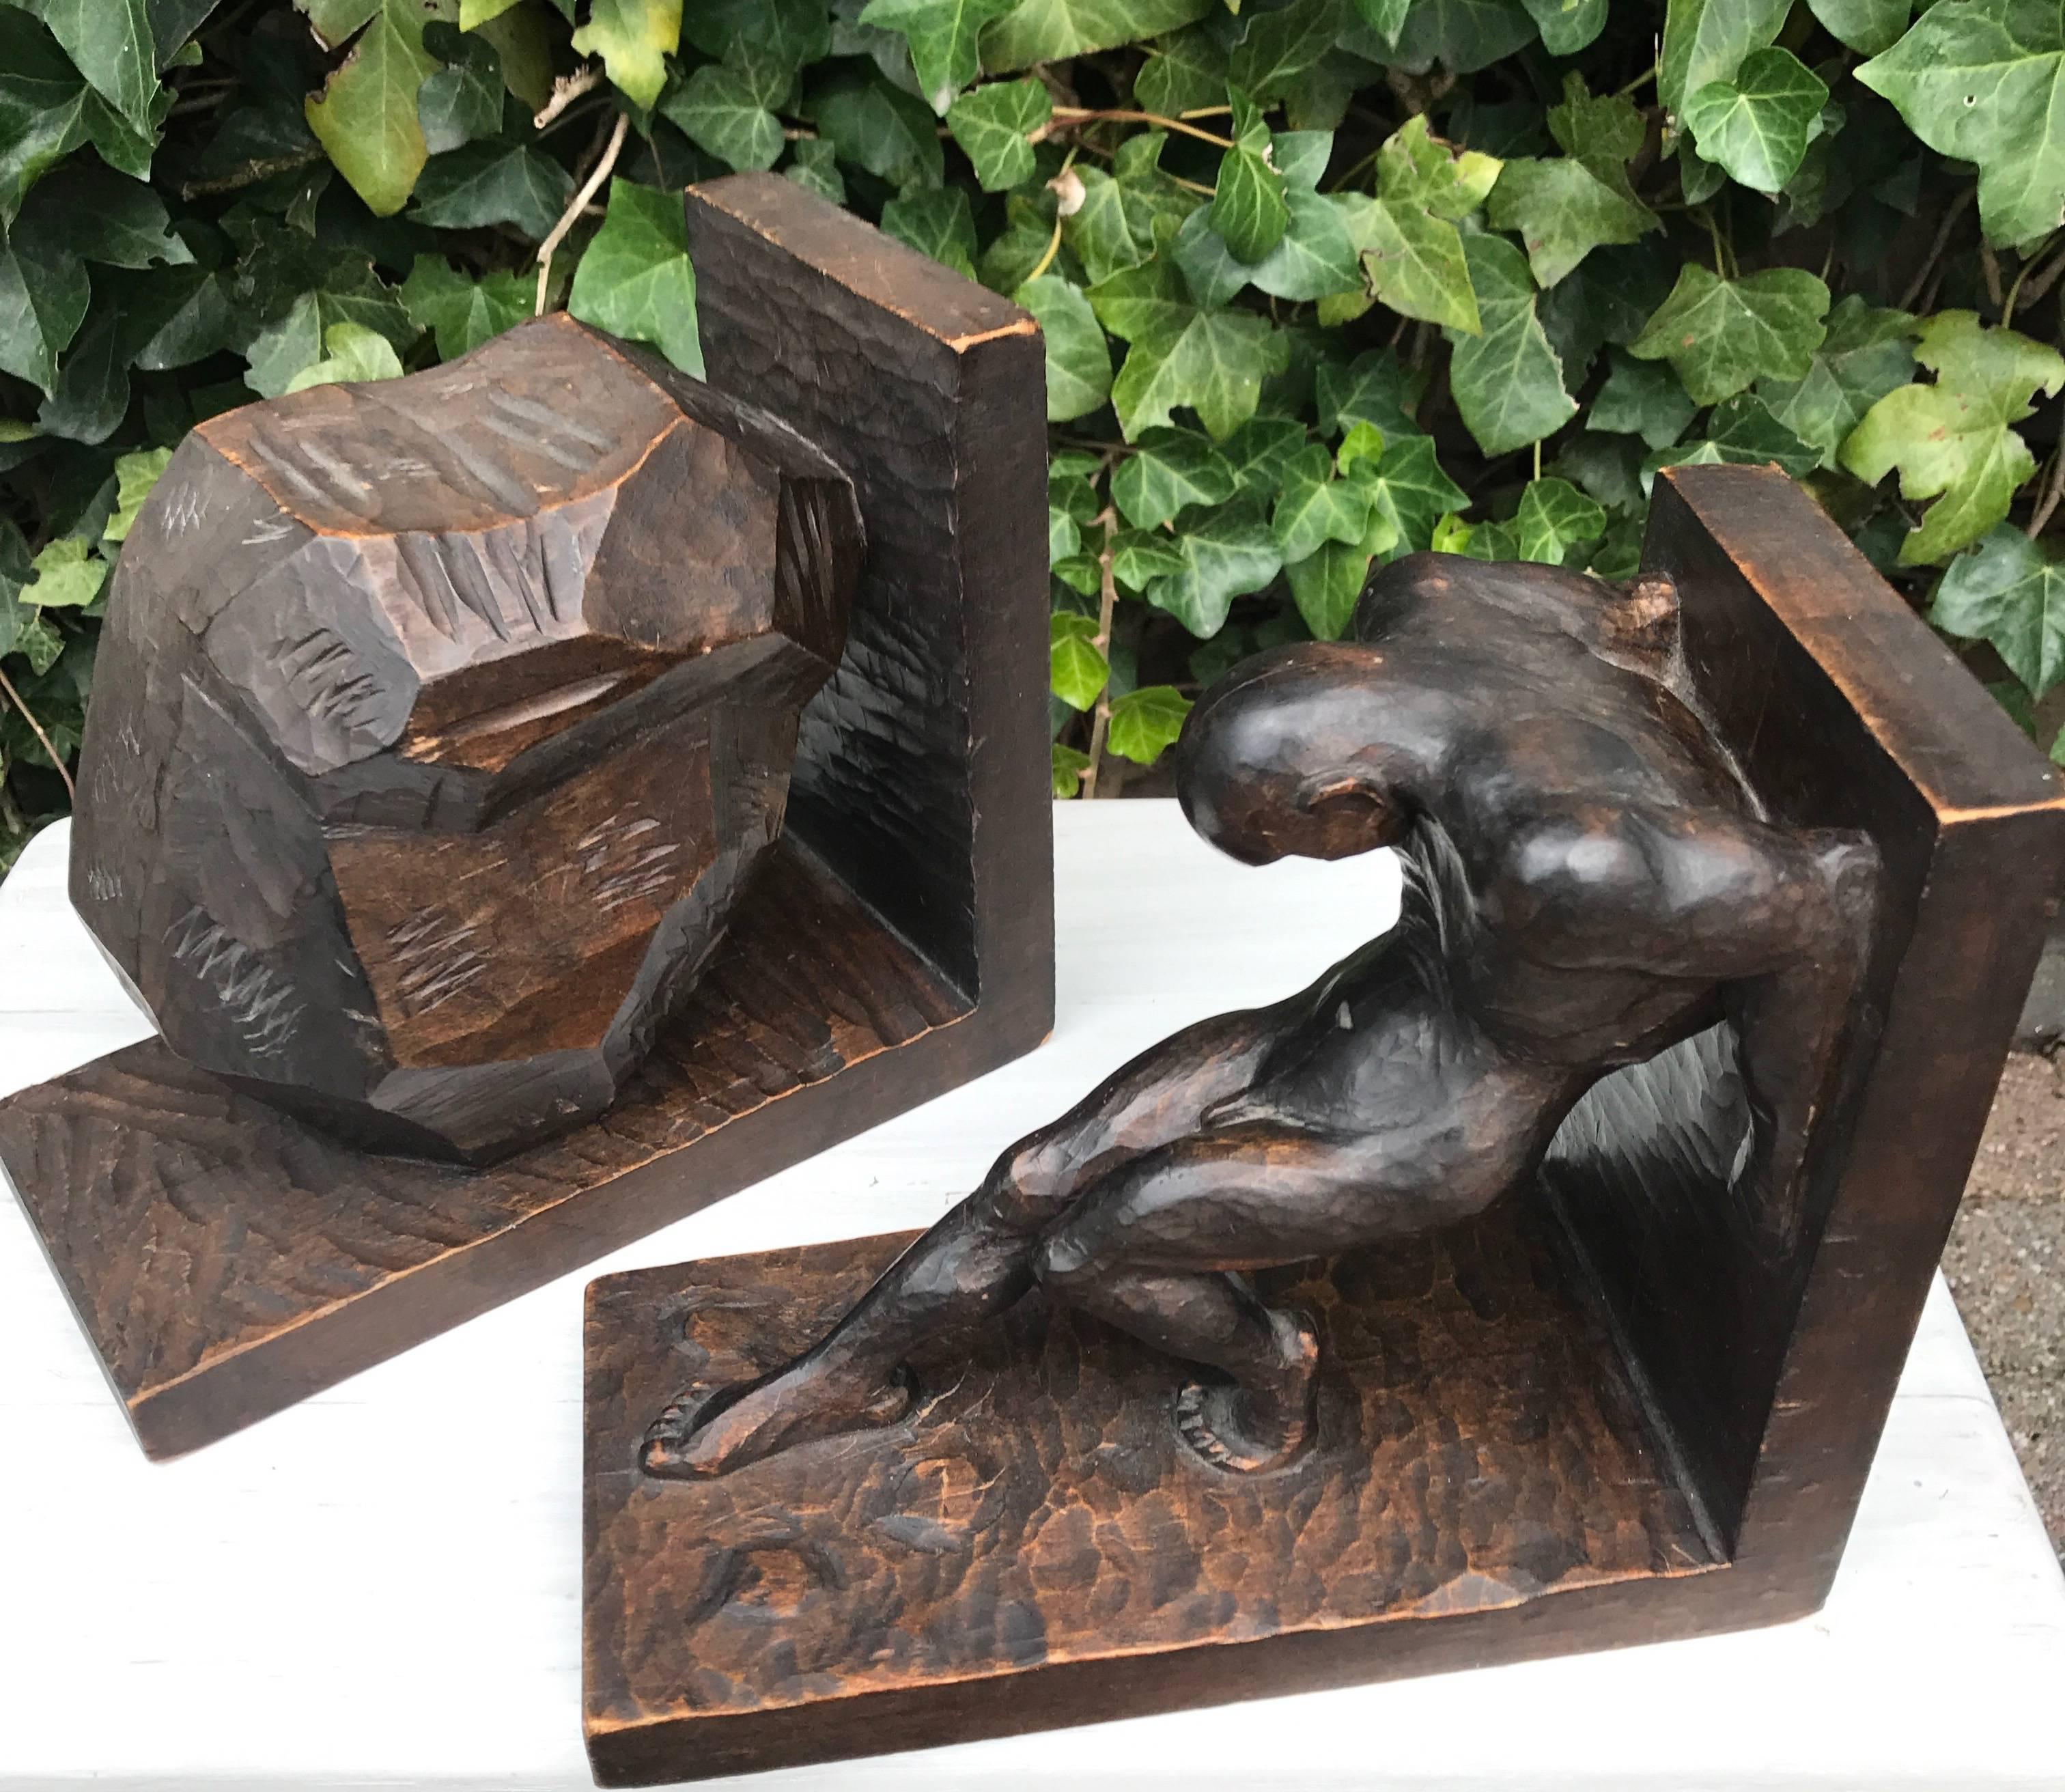 Impressive and stylized strongman bookends.

The artist who made these wonderful bookends has perfectly captured the natural posture of a man pushing his back against an object. The stylized exaggeration of the nude male's muscular body makes this